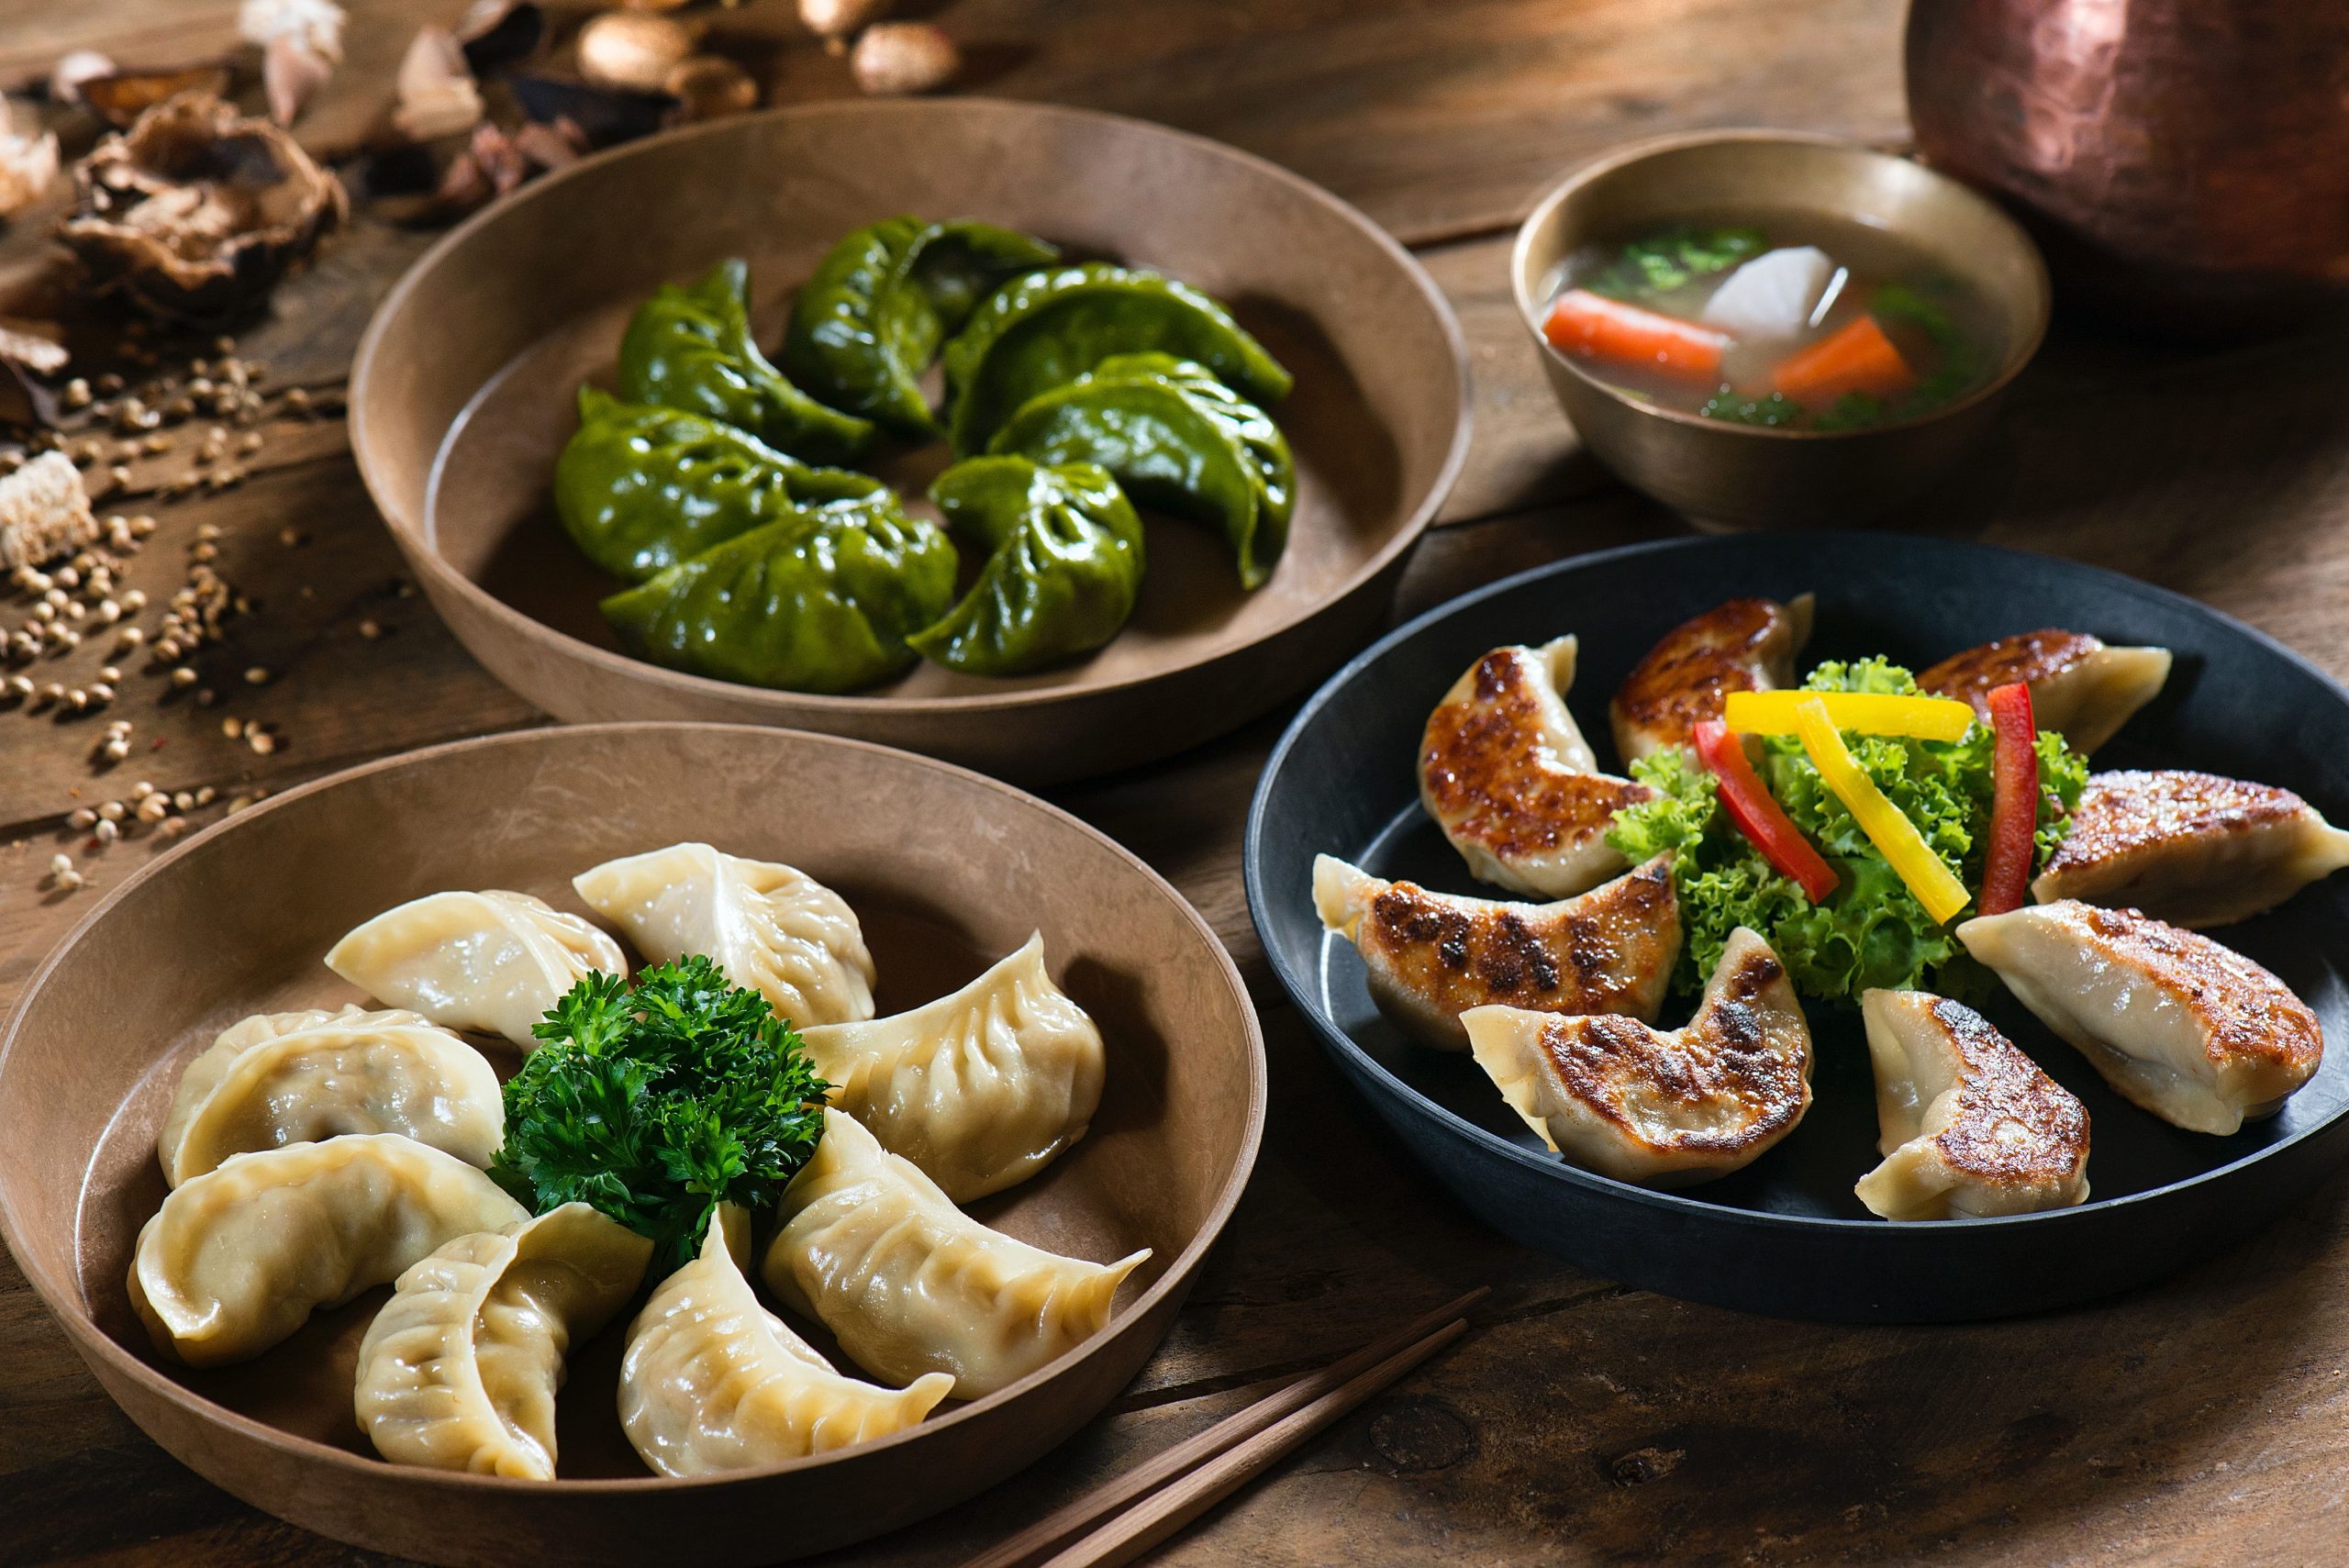 The Year of the Rabbit lucky foods: Here are some dishes to celebrate Chinese New Year 2023